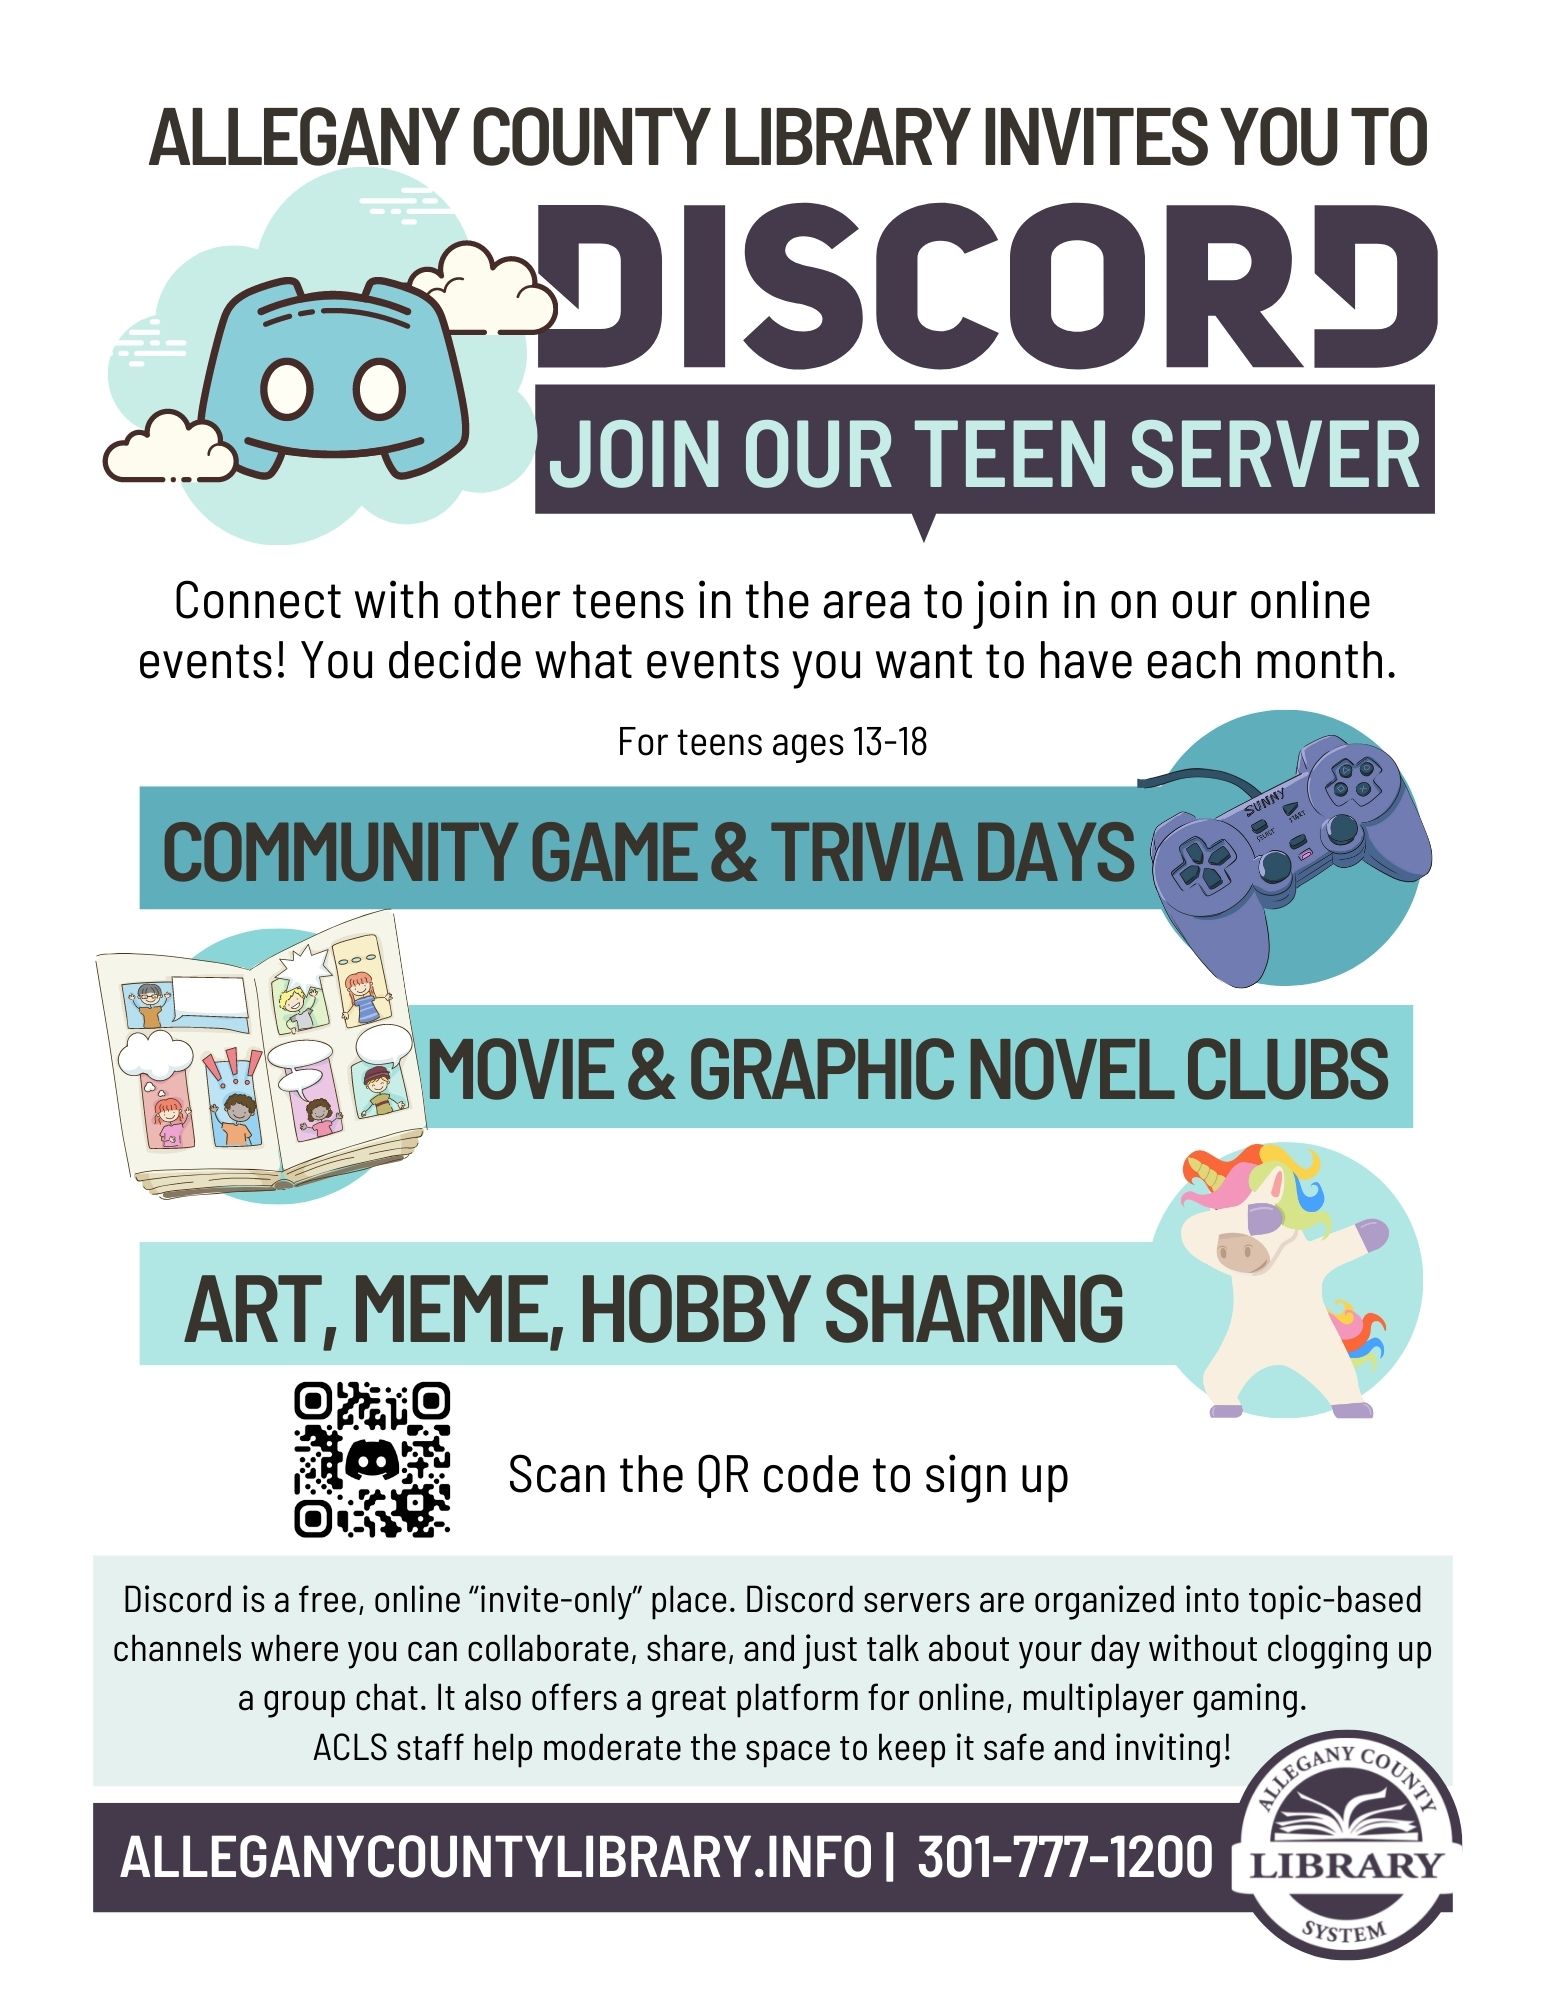 Teen Discord | Allegany County Library System